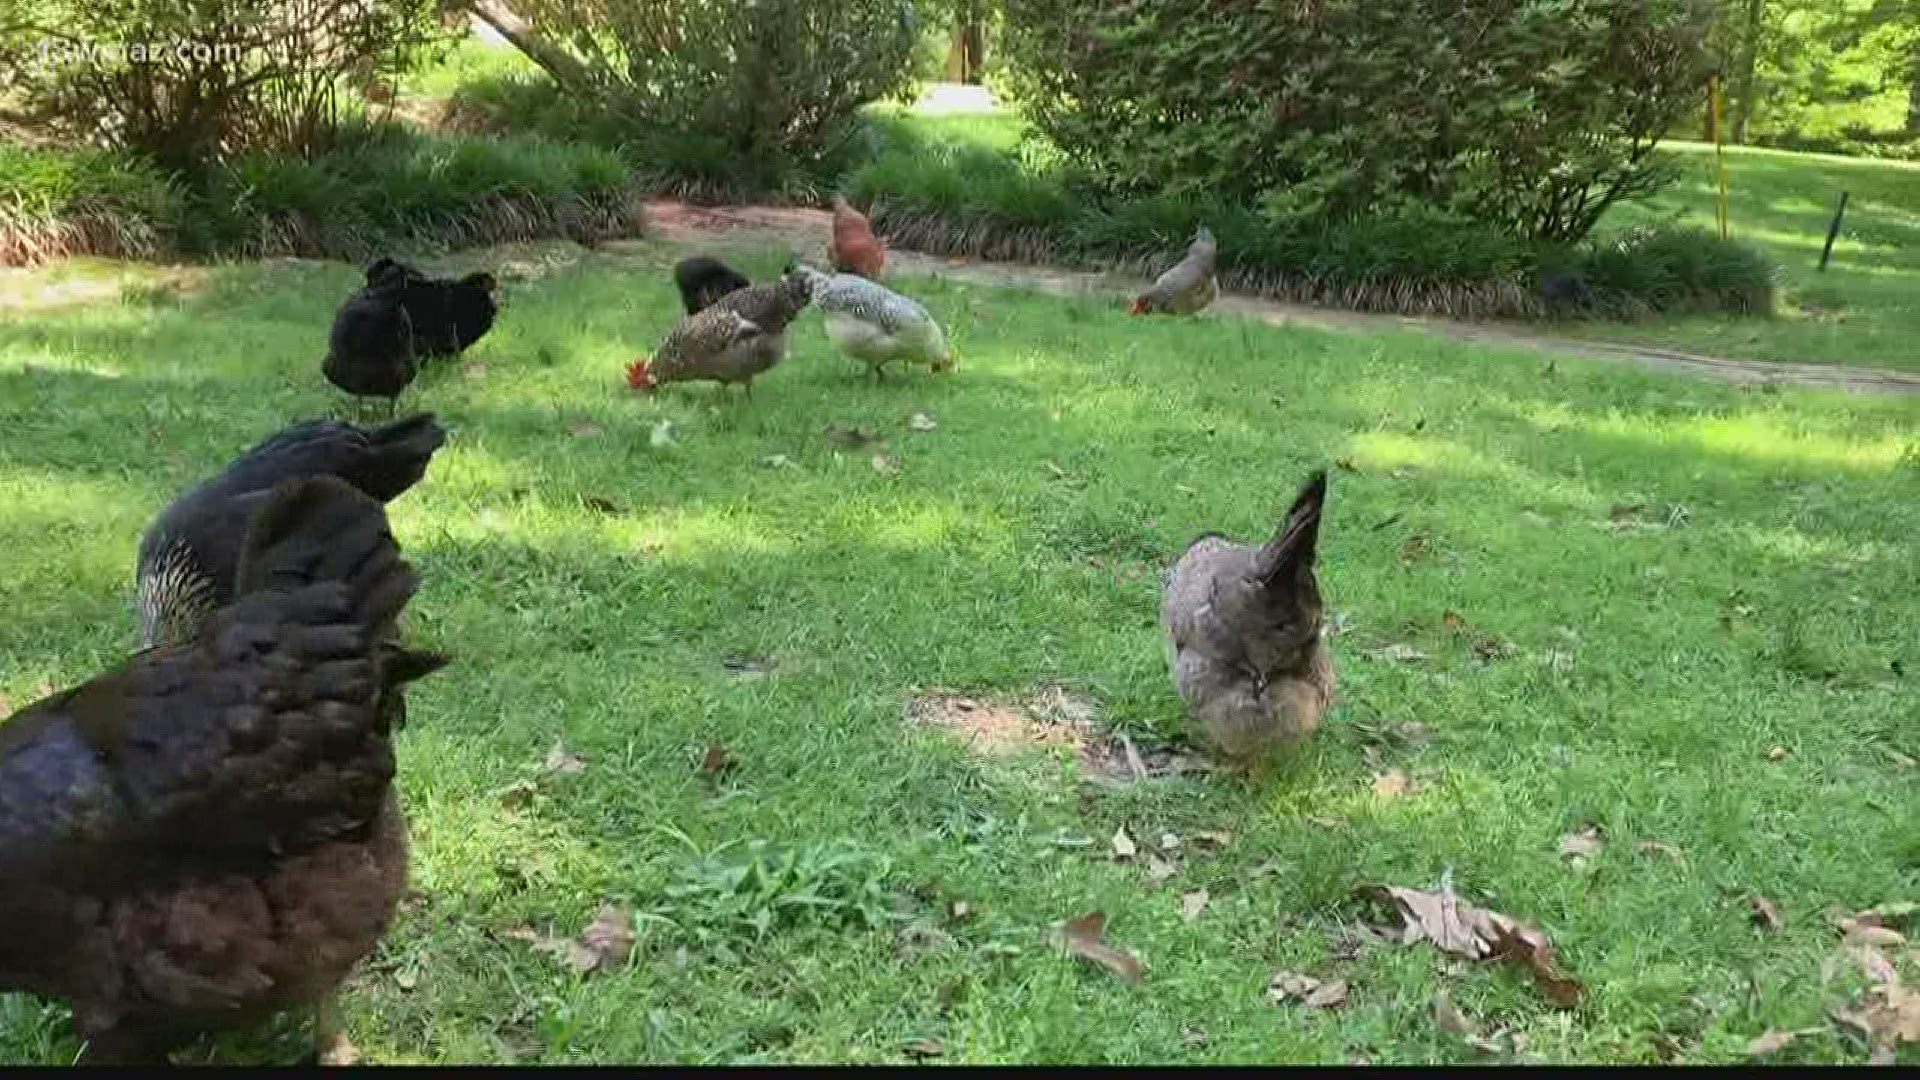 Some Central Georgia families are relying on their own resources for food. The Hatcher Hatchlings farm raises chickens.